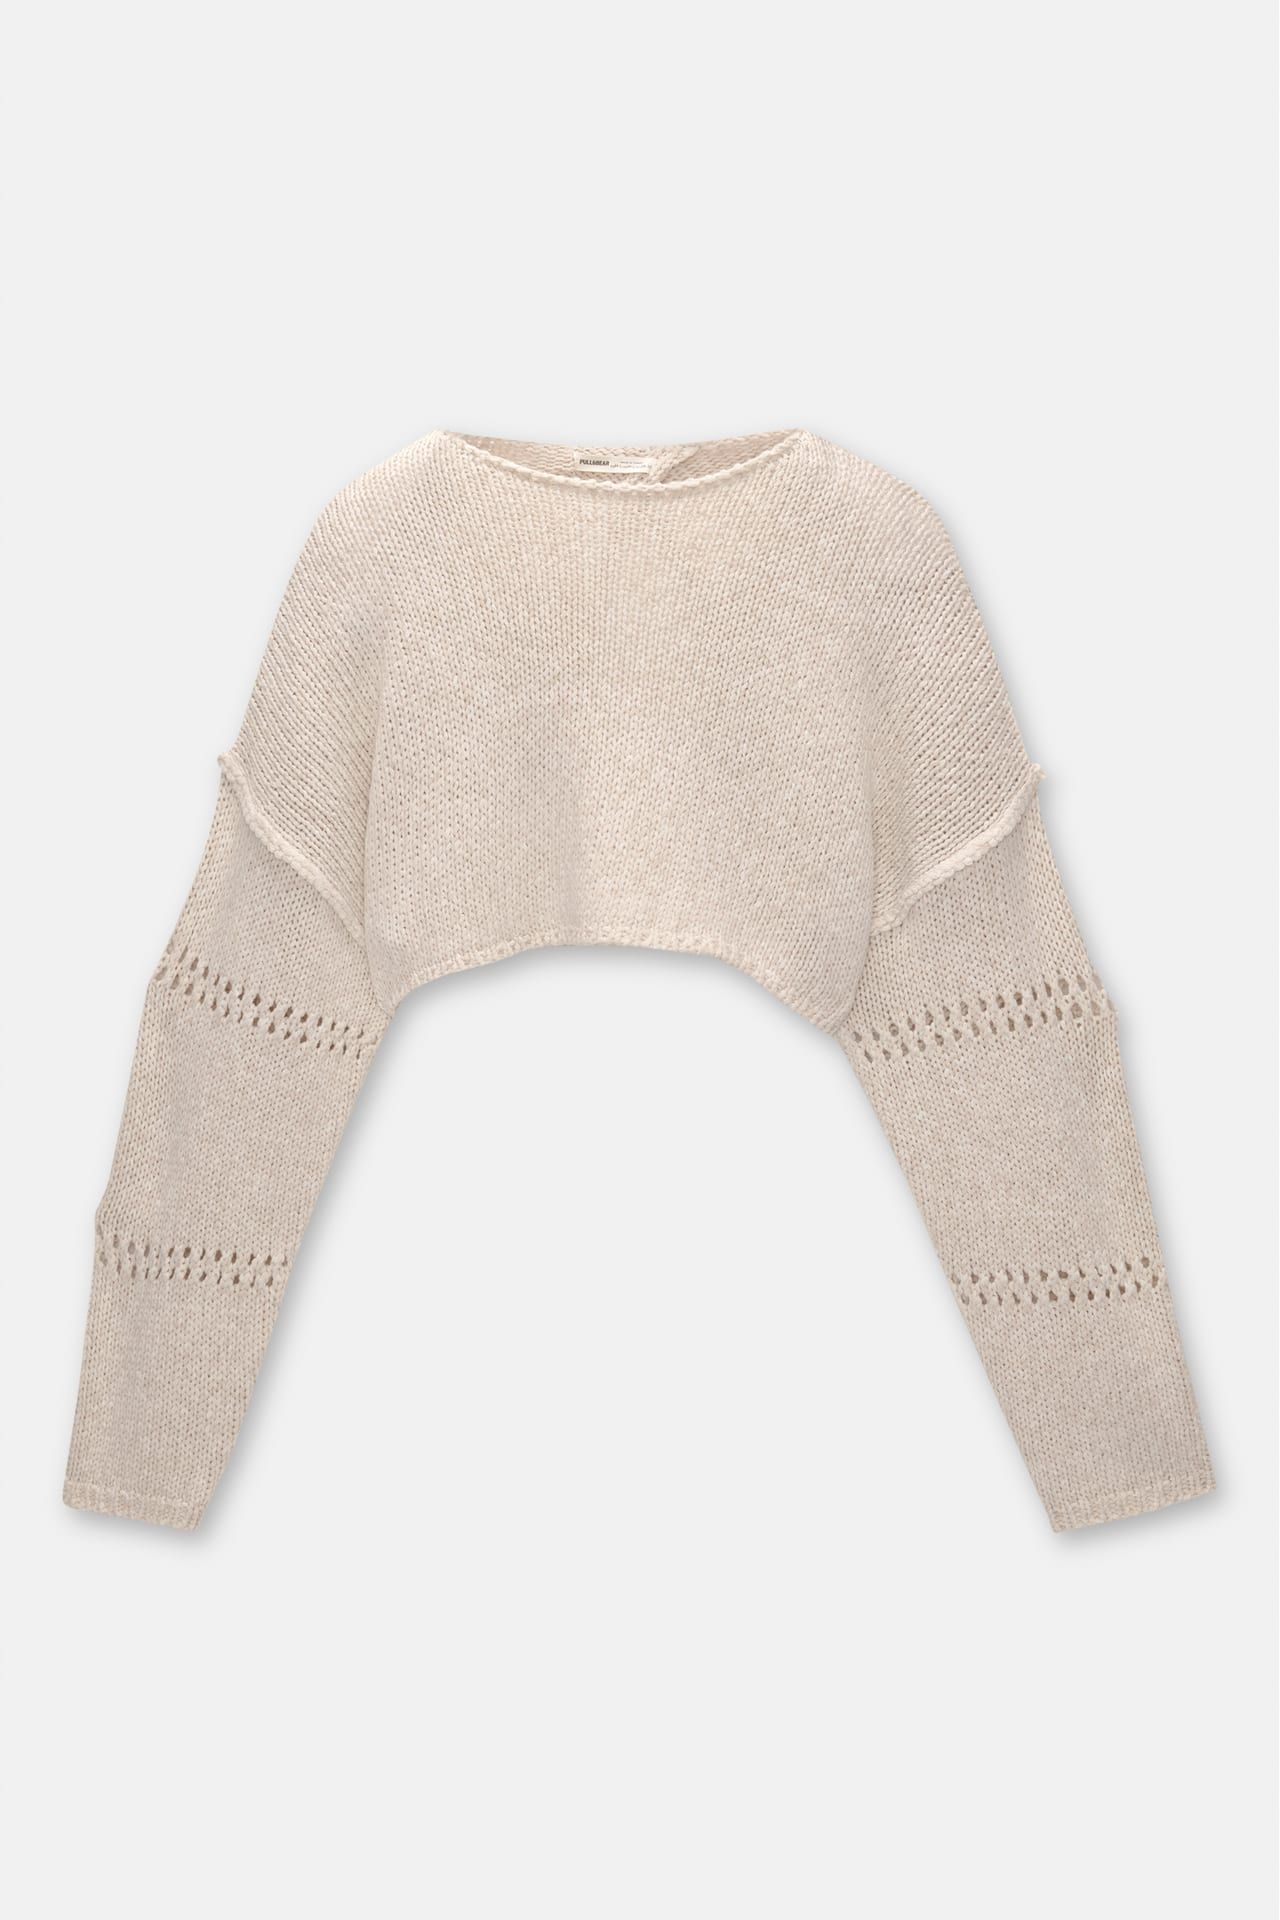 Open back knit sweater | PULL and BEAR UK